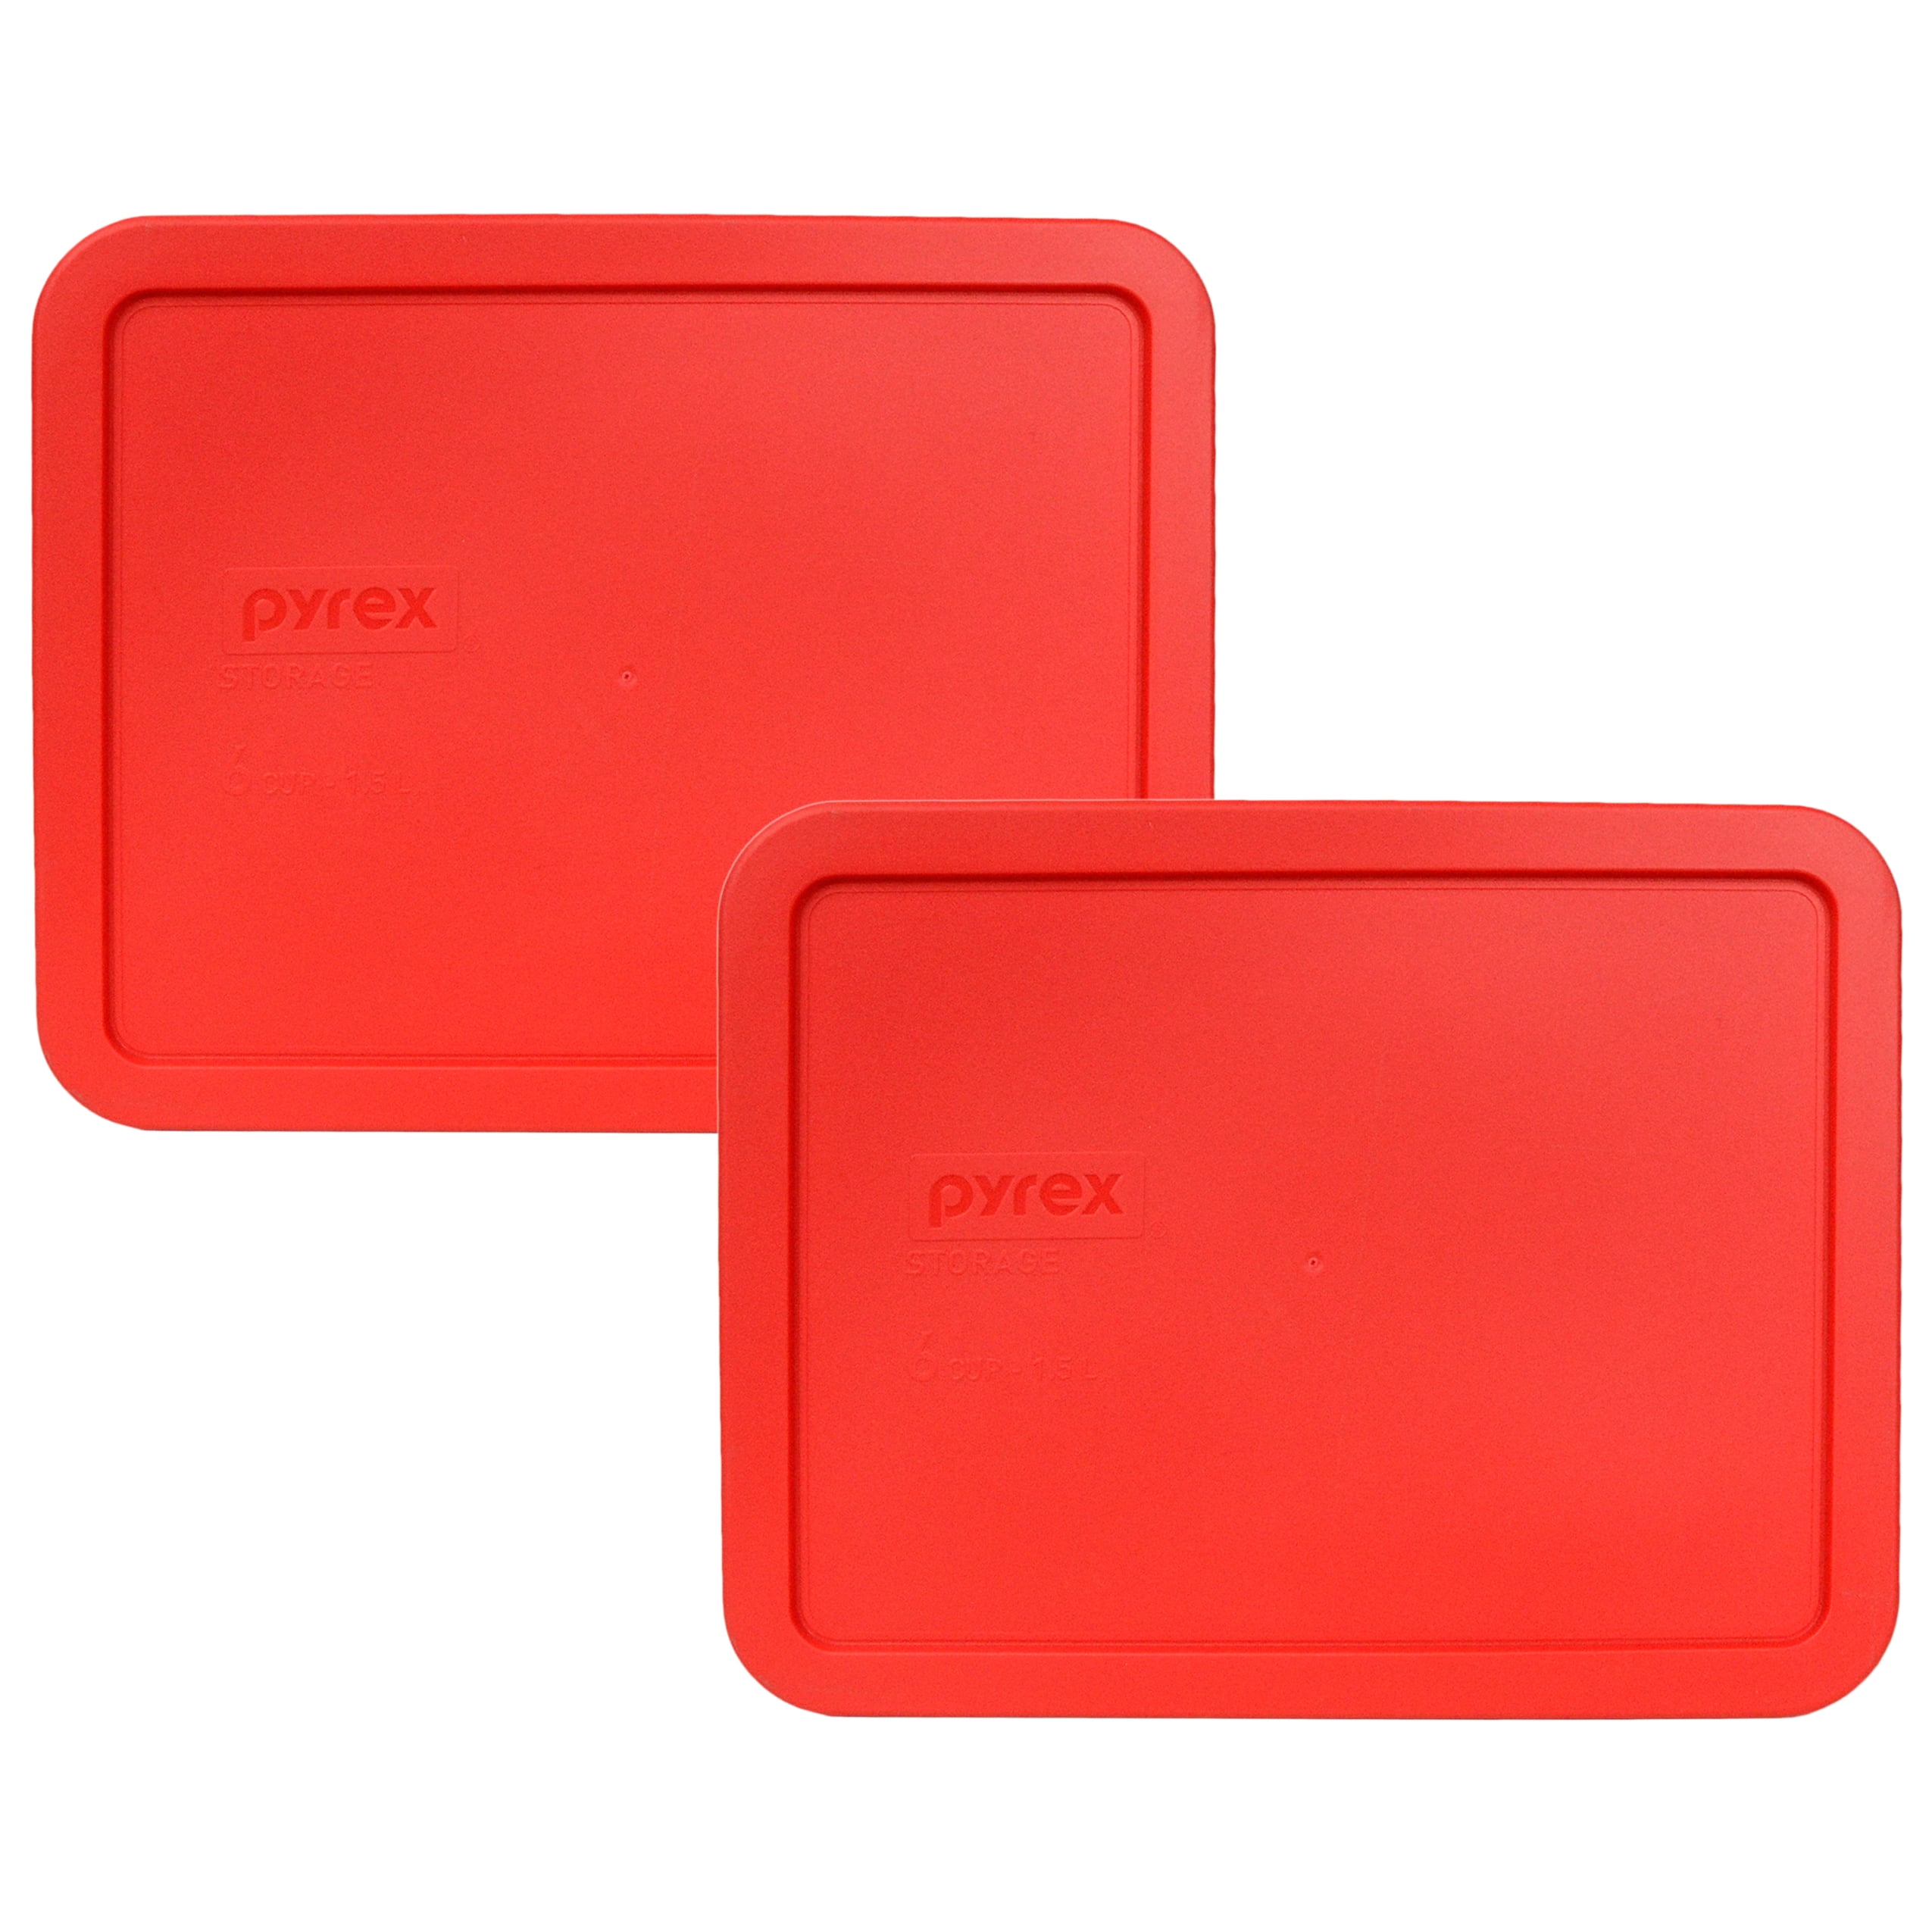 PYREX 7211-pc Rectangular 6 Cup Plastic Storage Lid Cover for Glass Dish》blue for sale online 